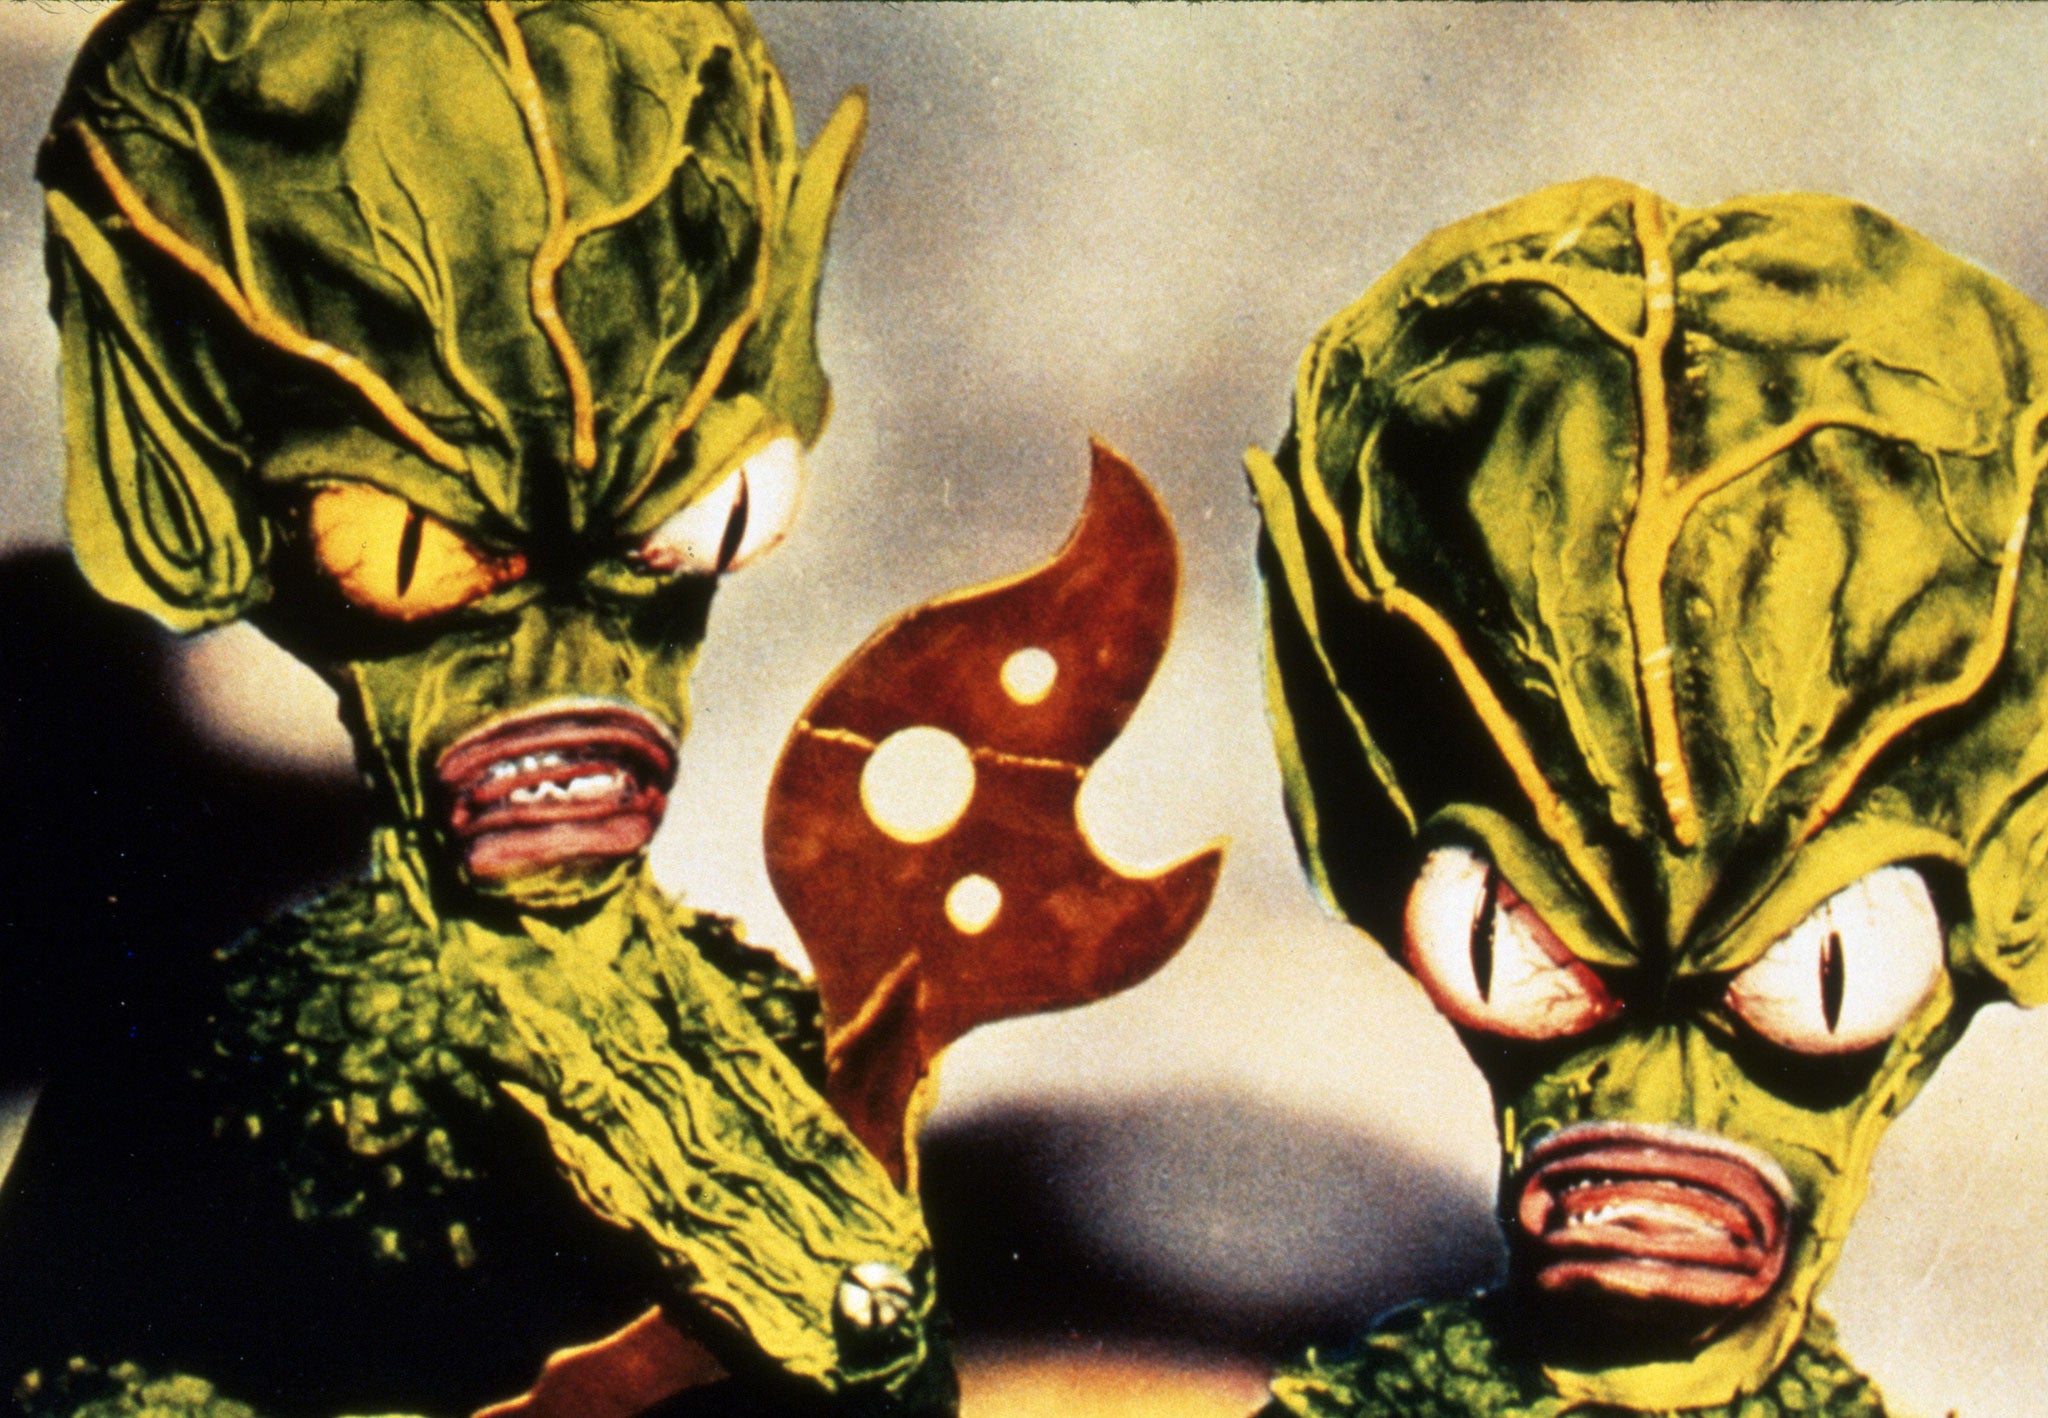 Things from another world: Aliens in Invasion of the Saucer Men